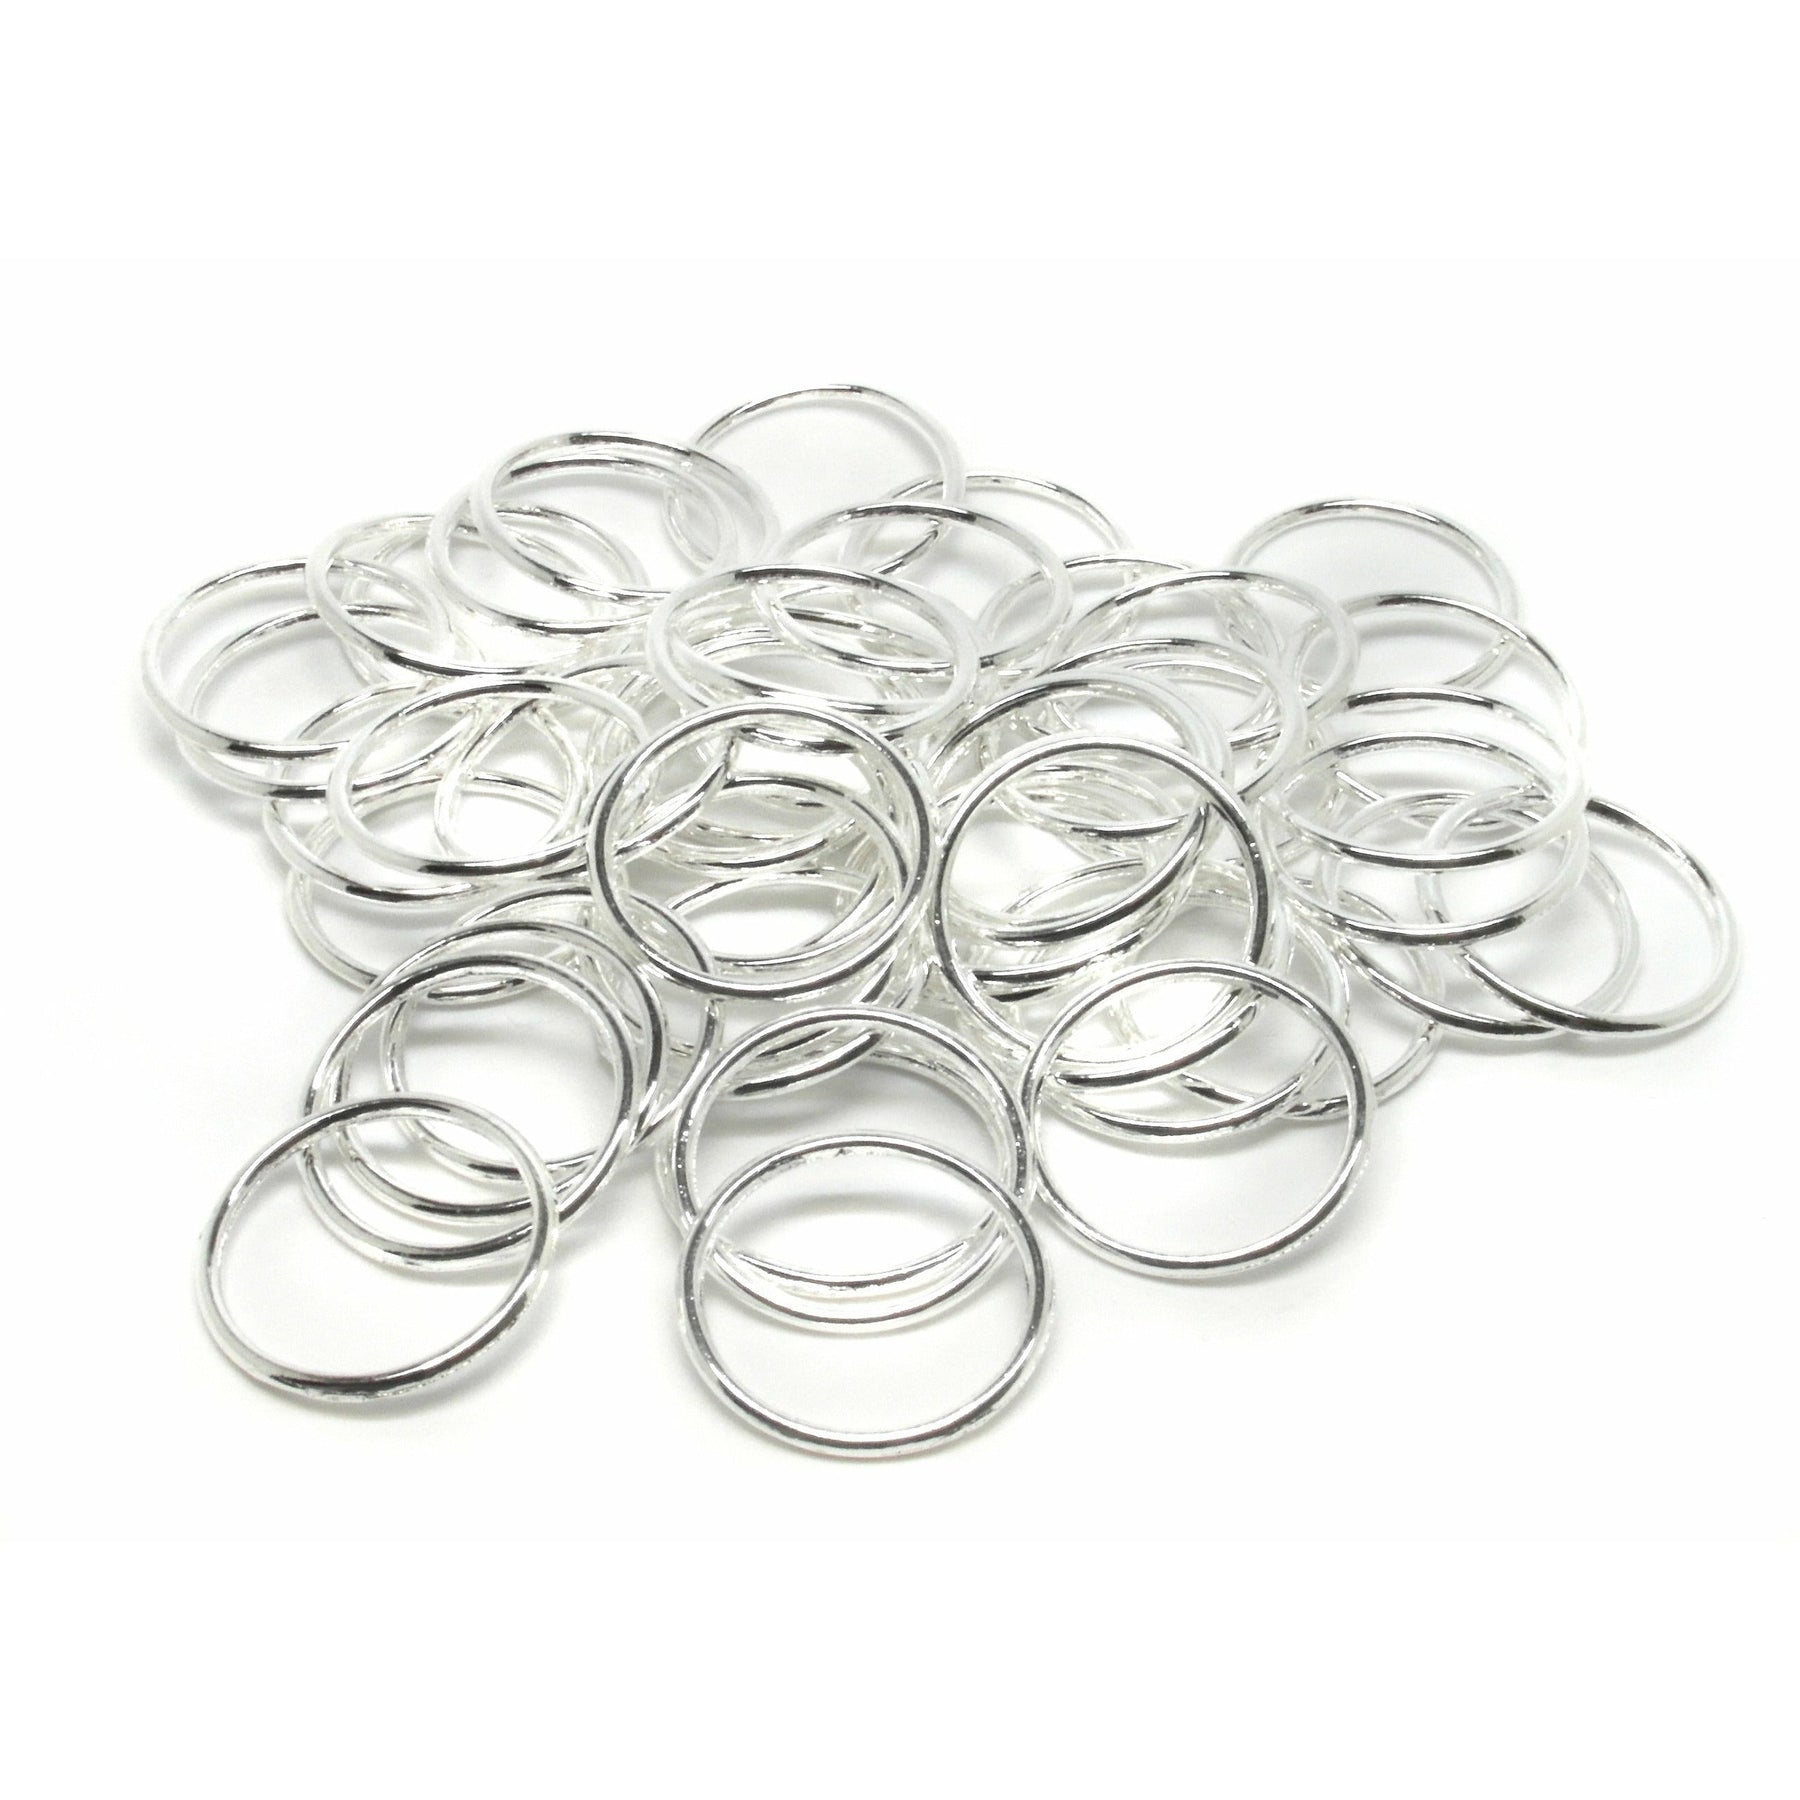 Large Jump Rings Silver 24mm